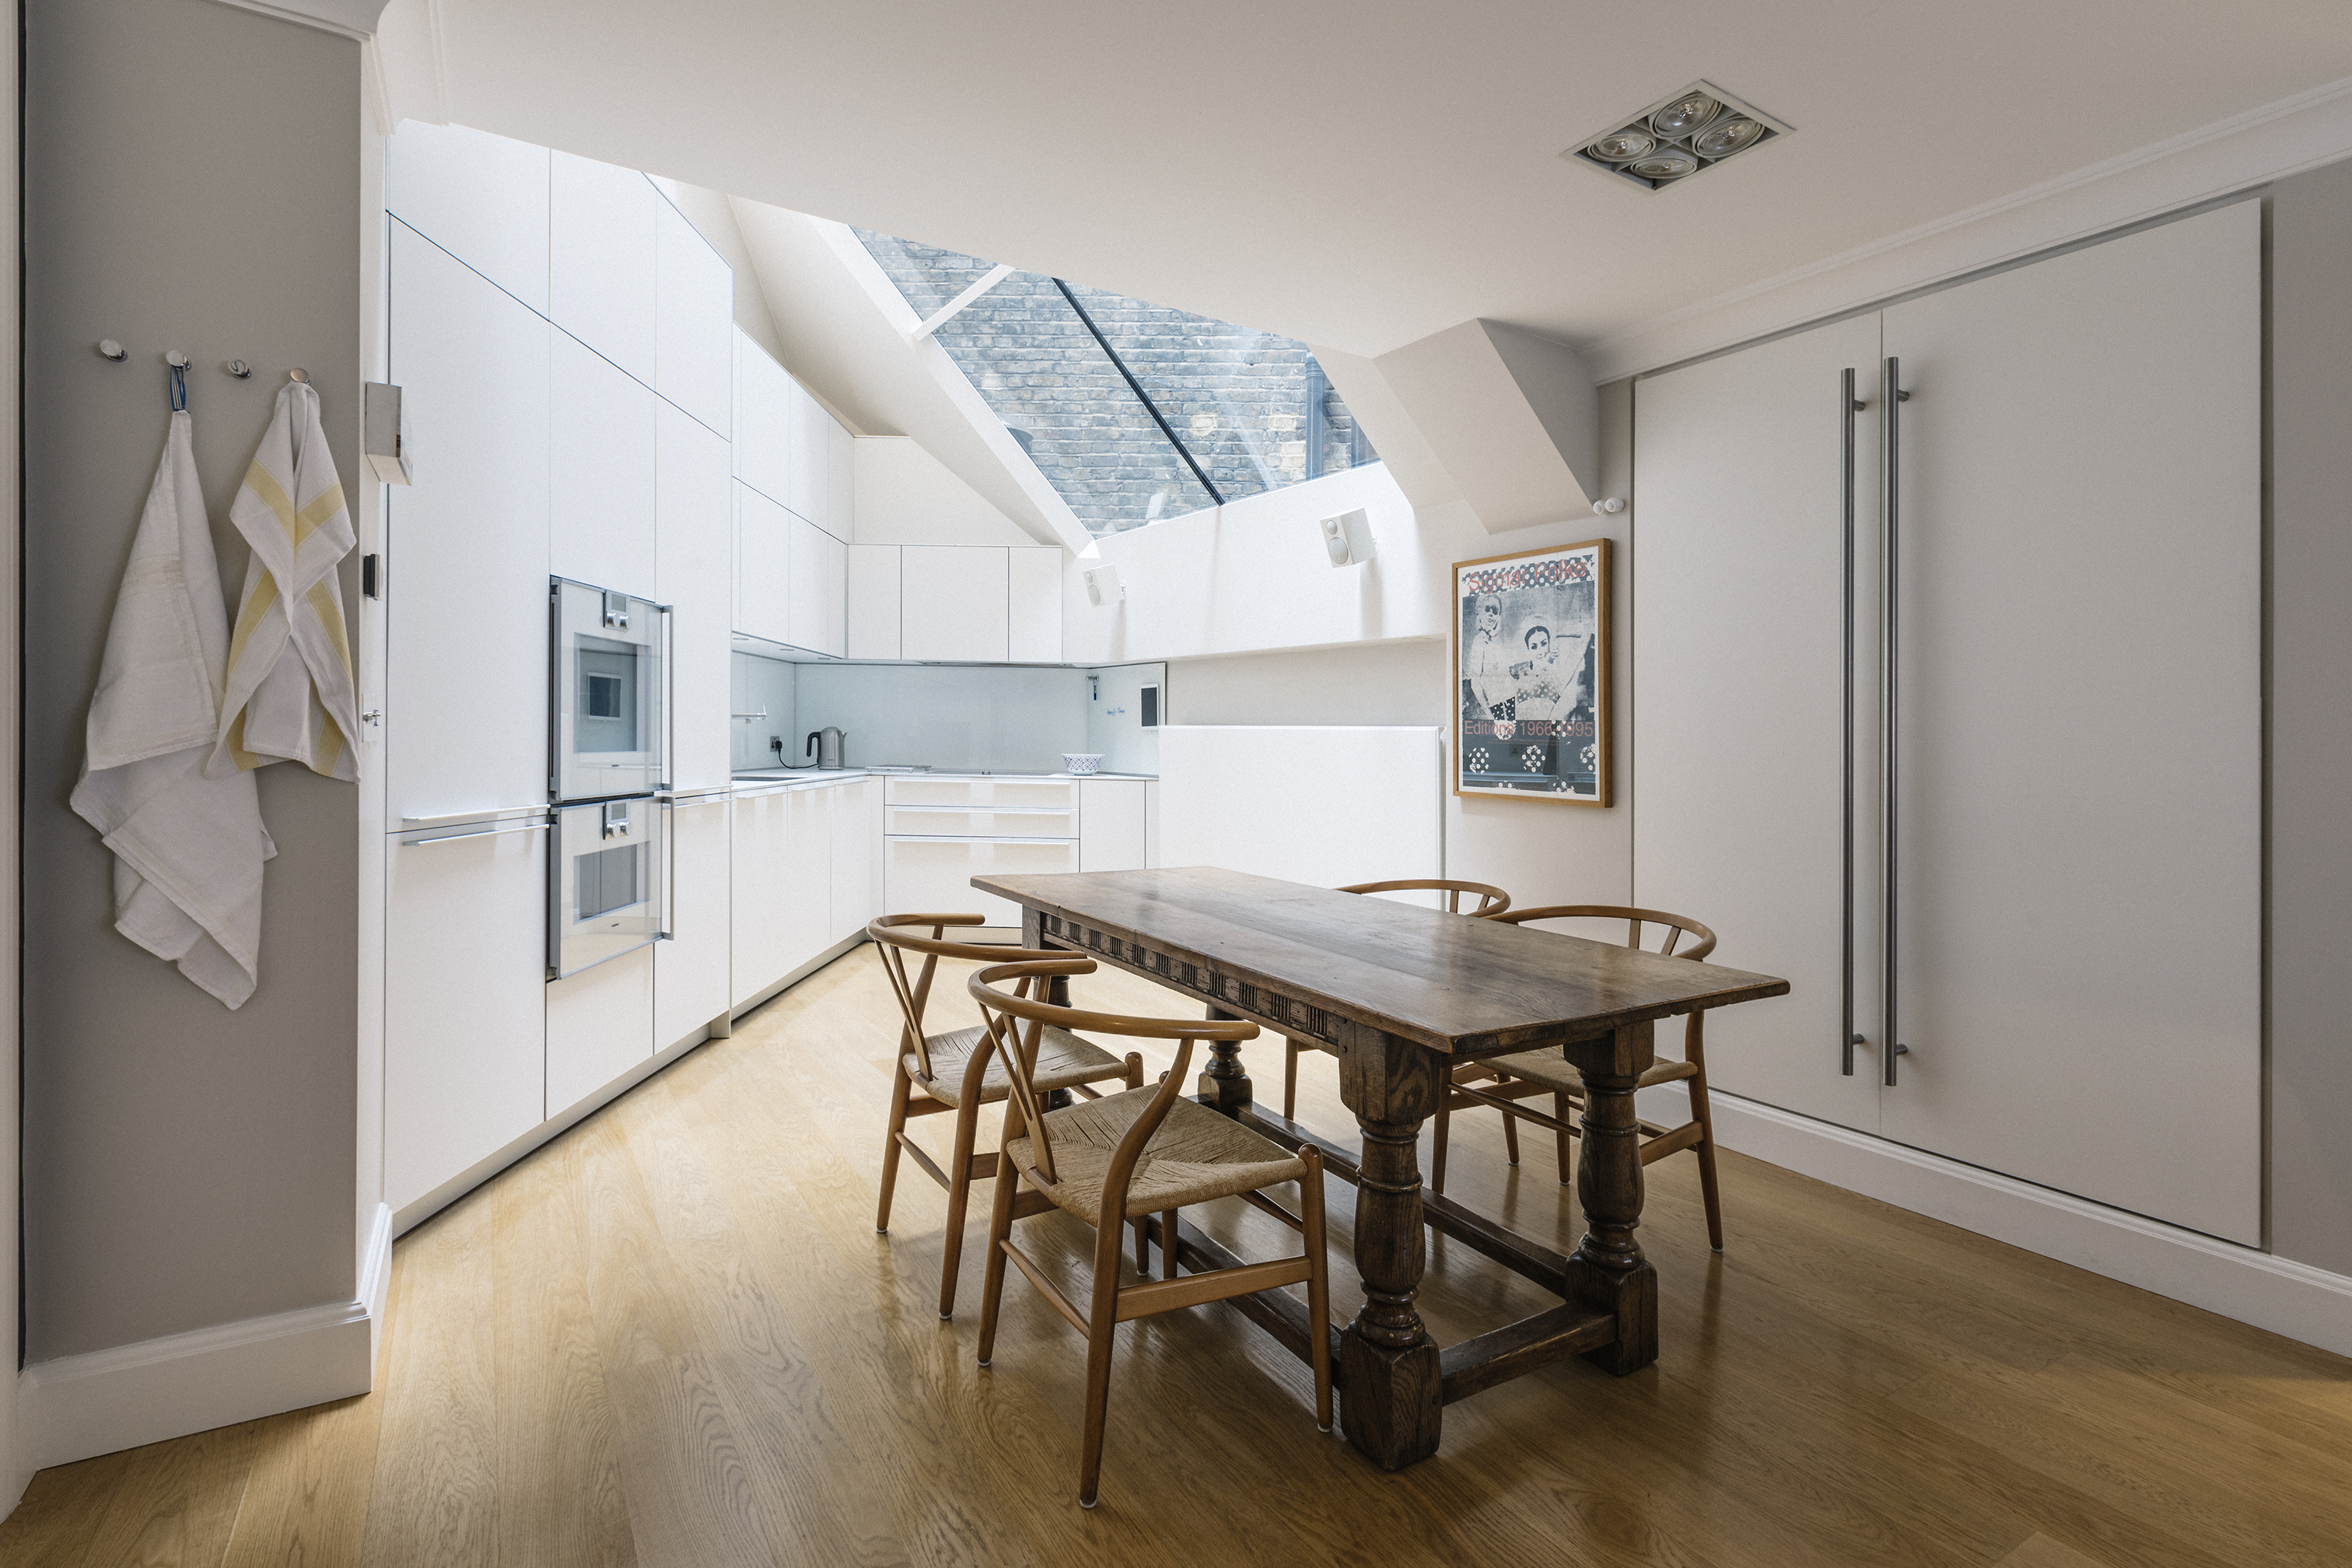 Opening up the roof allows light to poor into the basement kitchen. Strict and clean kitchen units are anchored by the classic rectory table and Mid-Century Modern chairs